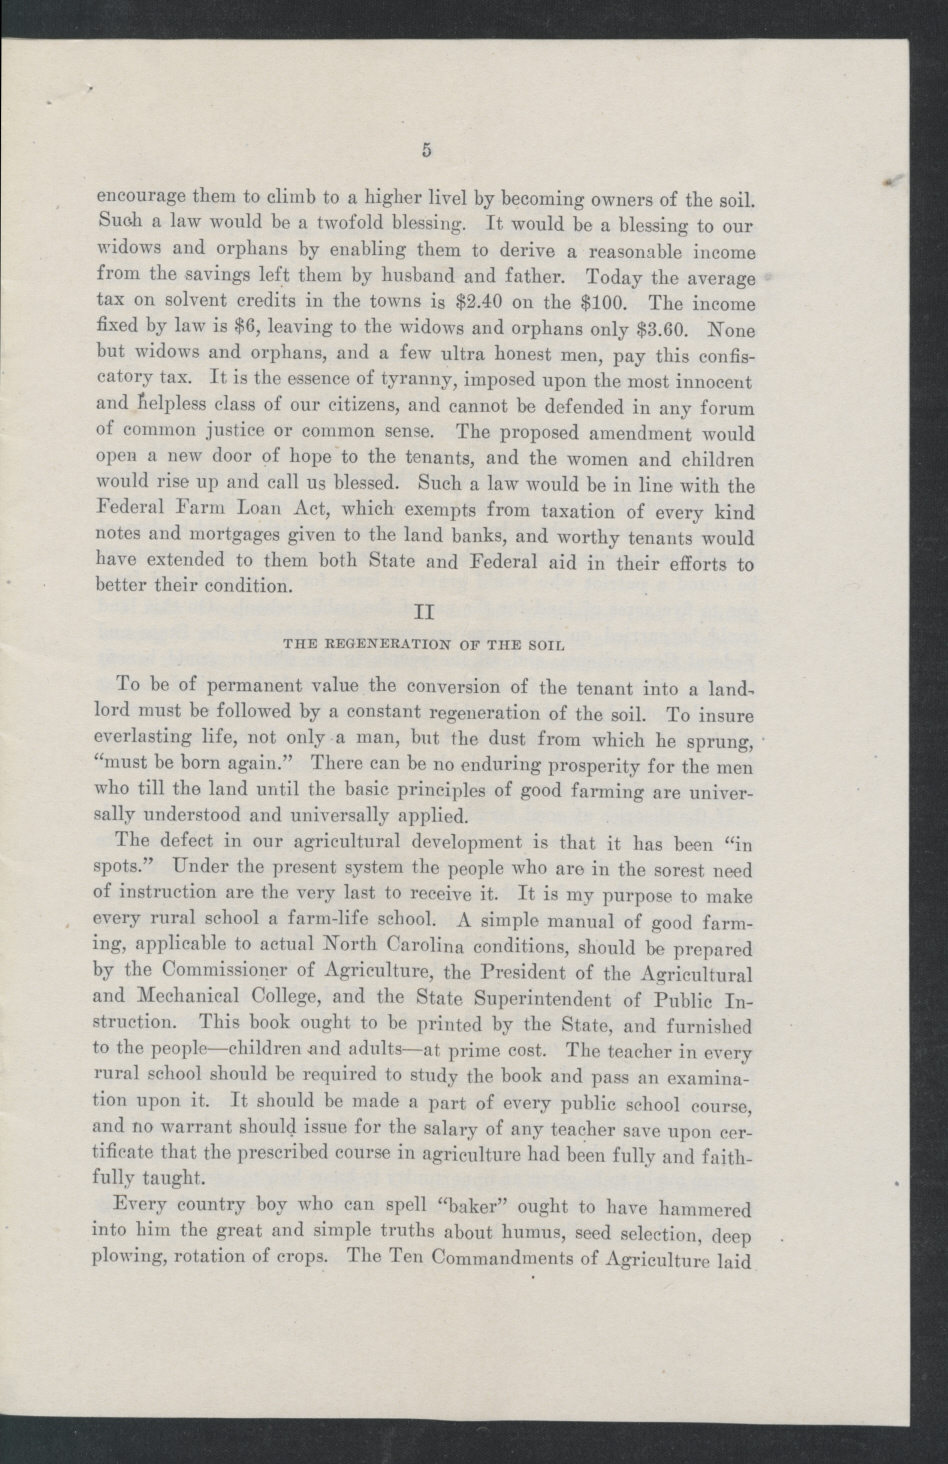 Inaugural Address of Governor Thomas W. Bickett to the General Assembly, January 11, 1917, page 3